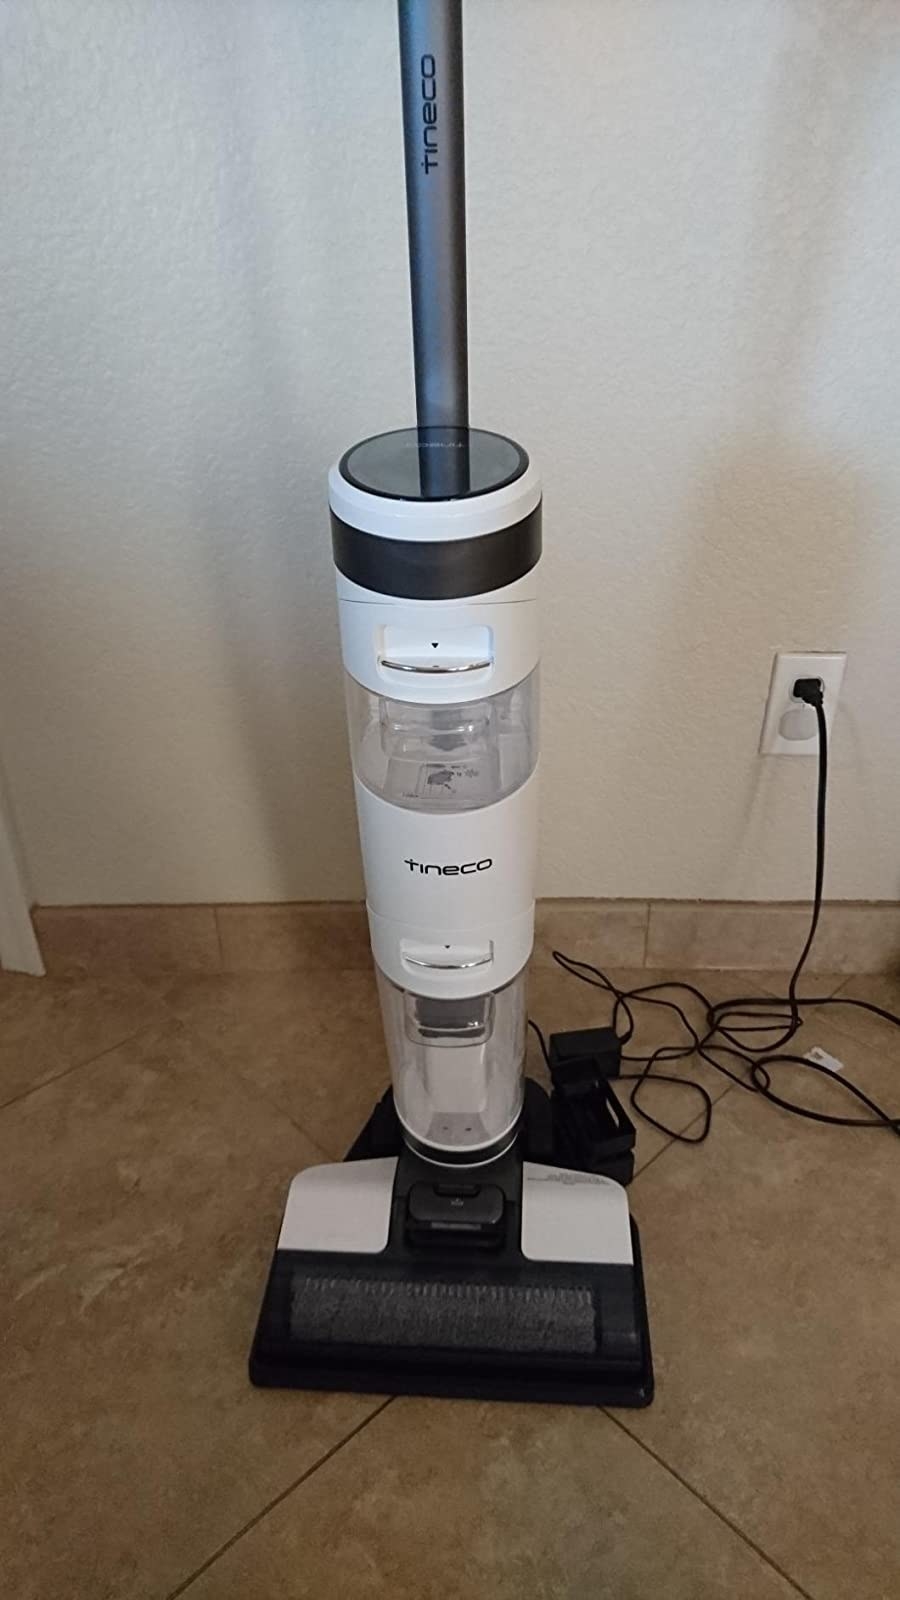 Review photo of the vacuum cleaner